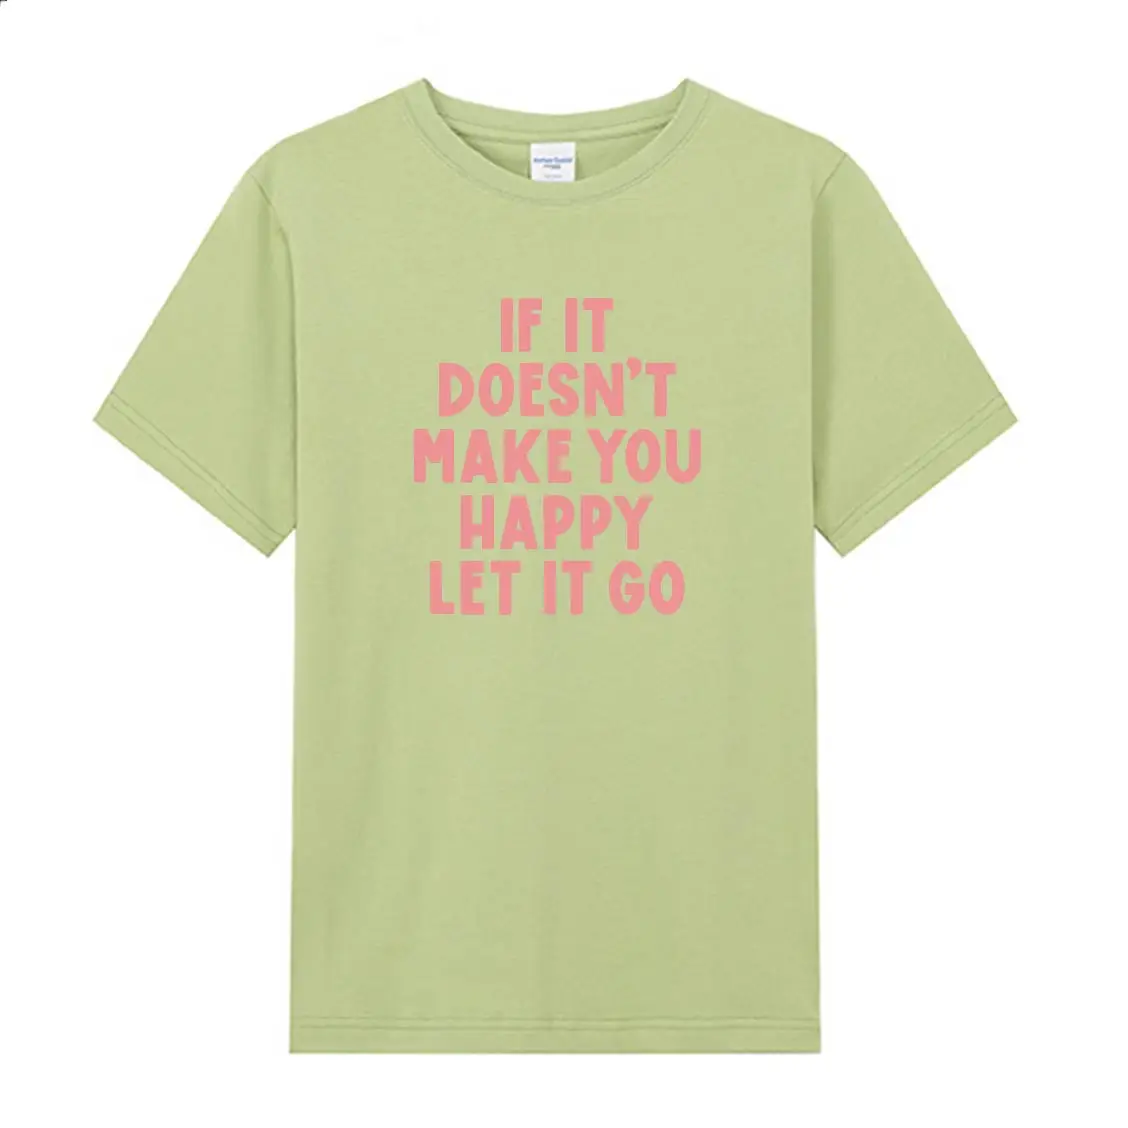 Slogan Female Tee-Shirt If It Does't Make You Happy Let It Go Multicolor Casual Cotton T-Shirt Summer Womens Boutique Tops Tee images - 6